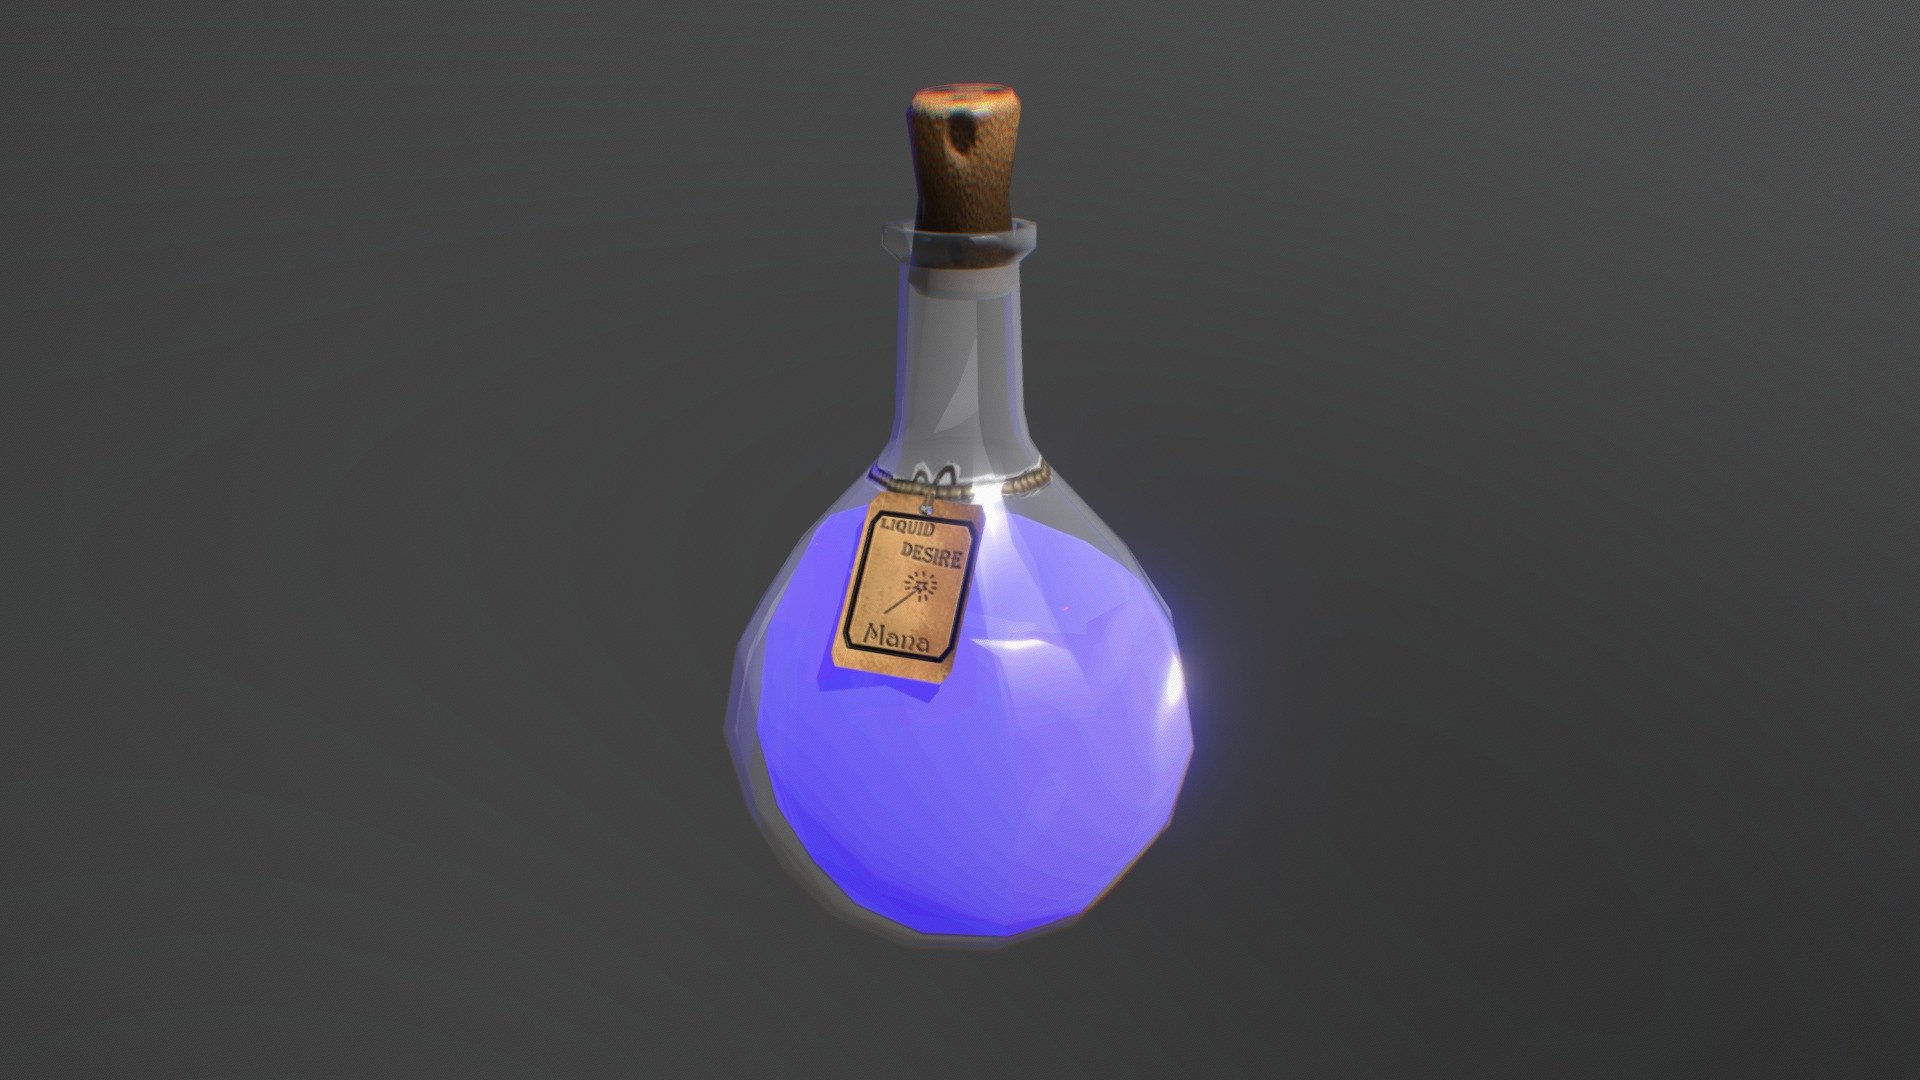 This is my potion bottle that i made in maya, this took me a few weeks to make 3d model